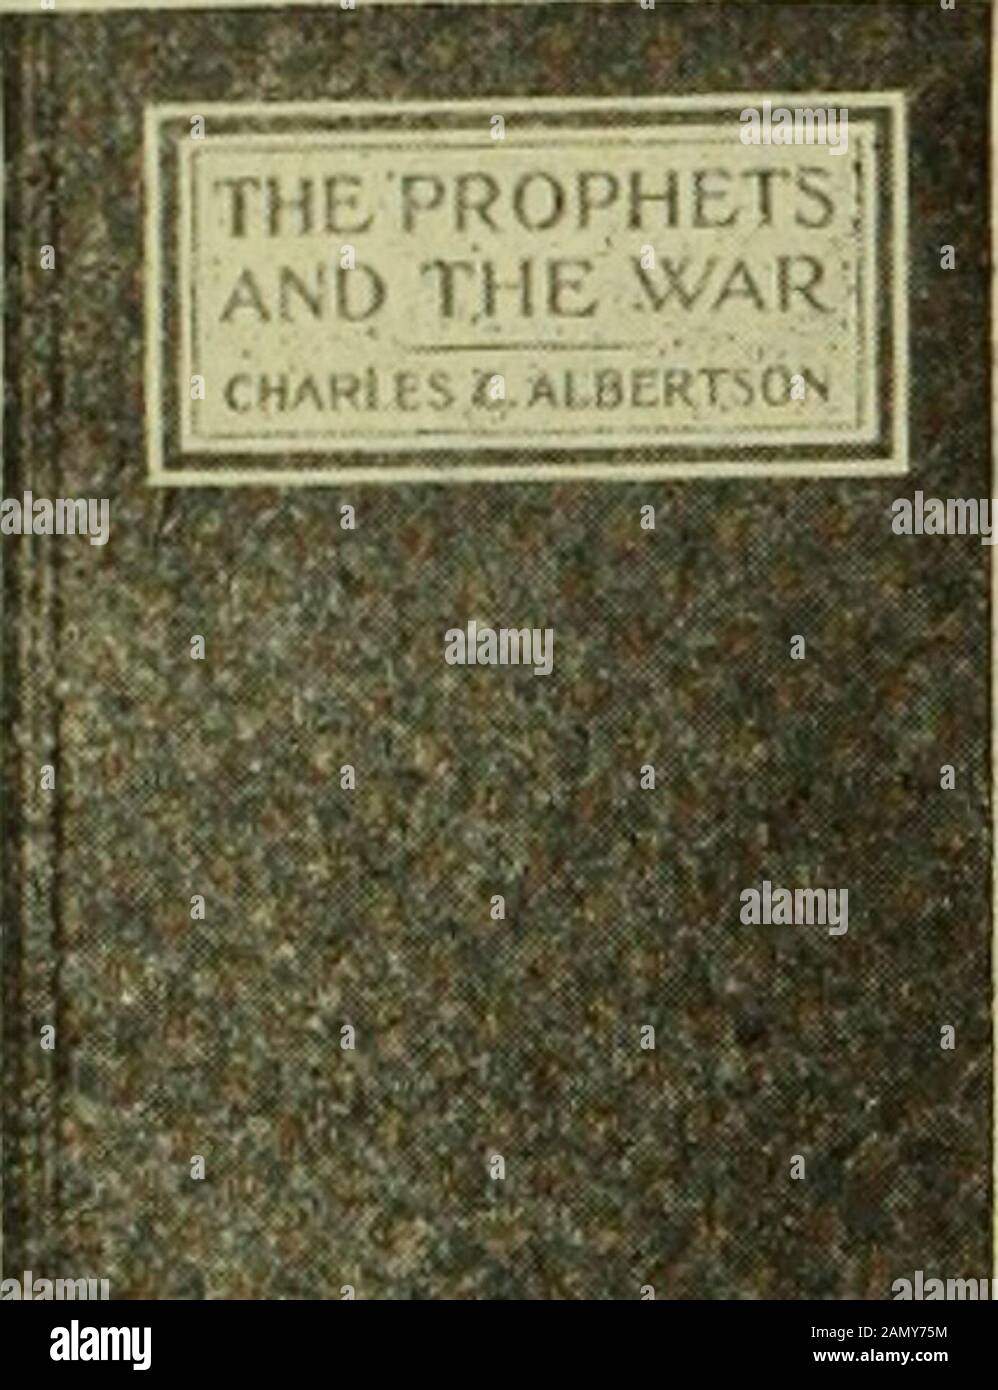 American messenger . CHRIST IN THE PEASANTS HOME 162 American Messenger. November, 1917. KEEP ABREAST BY READING NEW PUBLICATIONS, FALL, 1917 THE PROPHETS AND THE WAR By Charles Carroll Albertson, D.D. What is to come after the war? This is a volume of prophecy with a real application to the events of todayand tomorrow. A great message and lesson are still to be gained in this world war from Hosea, Habakkuk andIsaiah. Dr. Albertson in his Prophets and the War has shown what is happening and what will happenafter the war. With the interest lately shown in prophecy, it is a very important book. Stock Photo